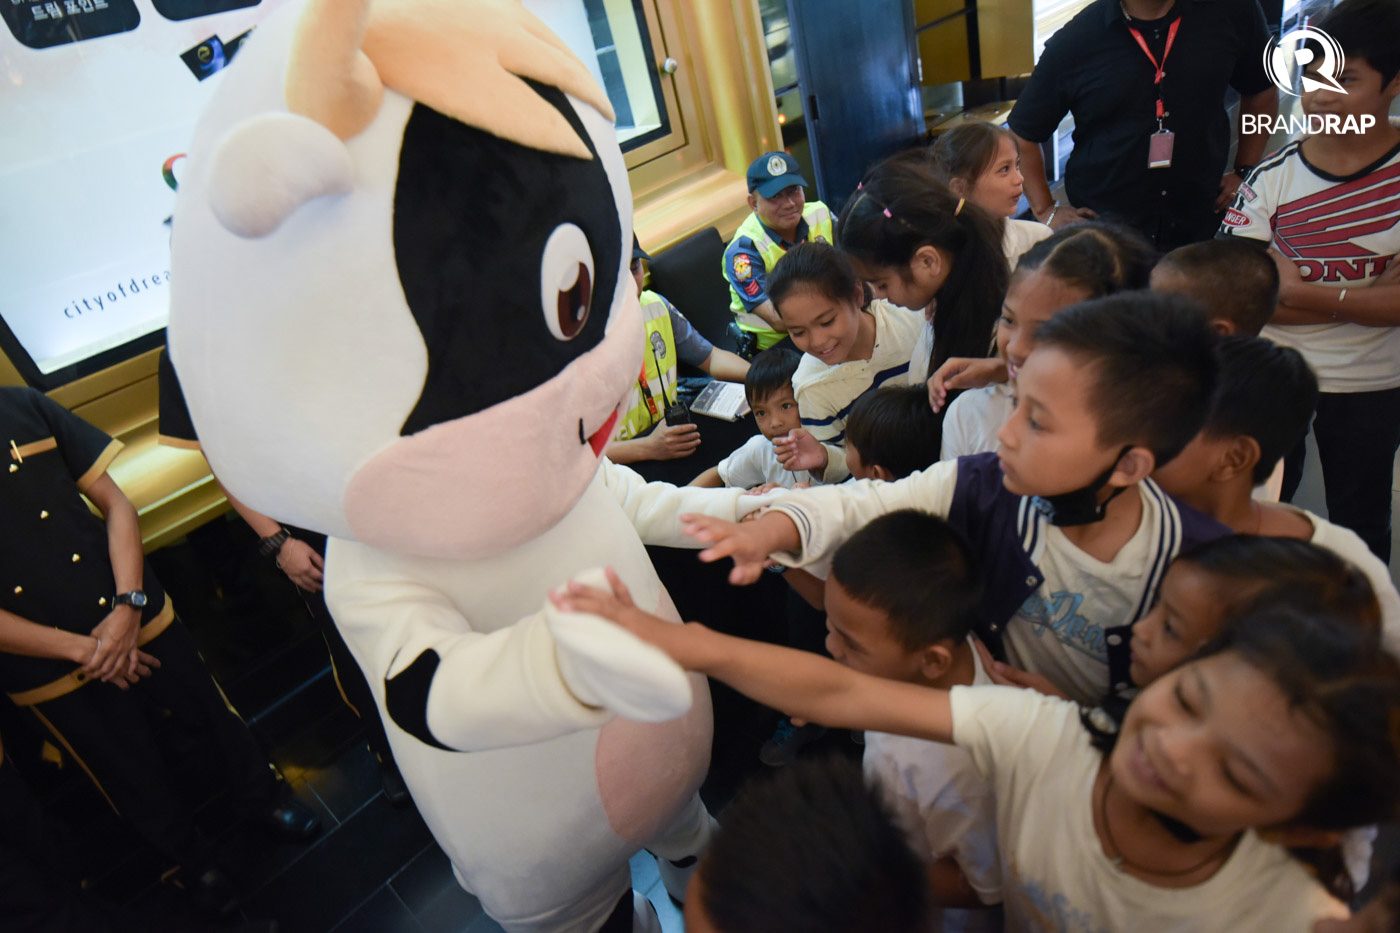 IN PHOTOS: Liza Soberano spends a fun afternoon with Bantay Bata 163 kids